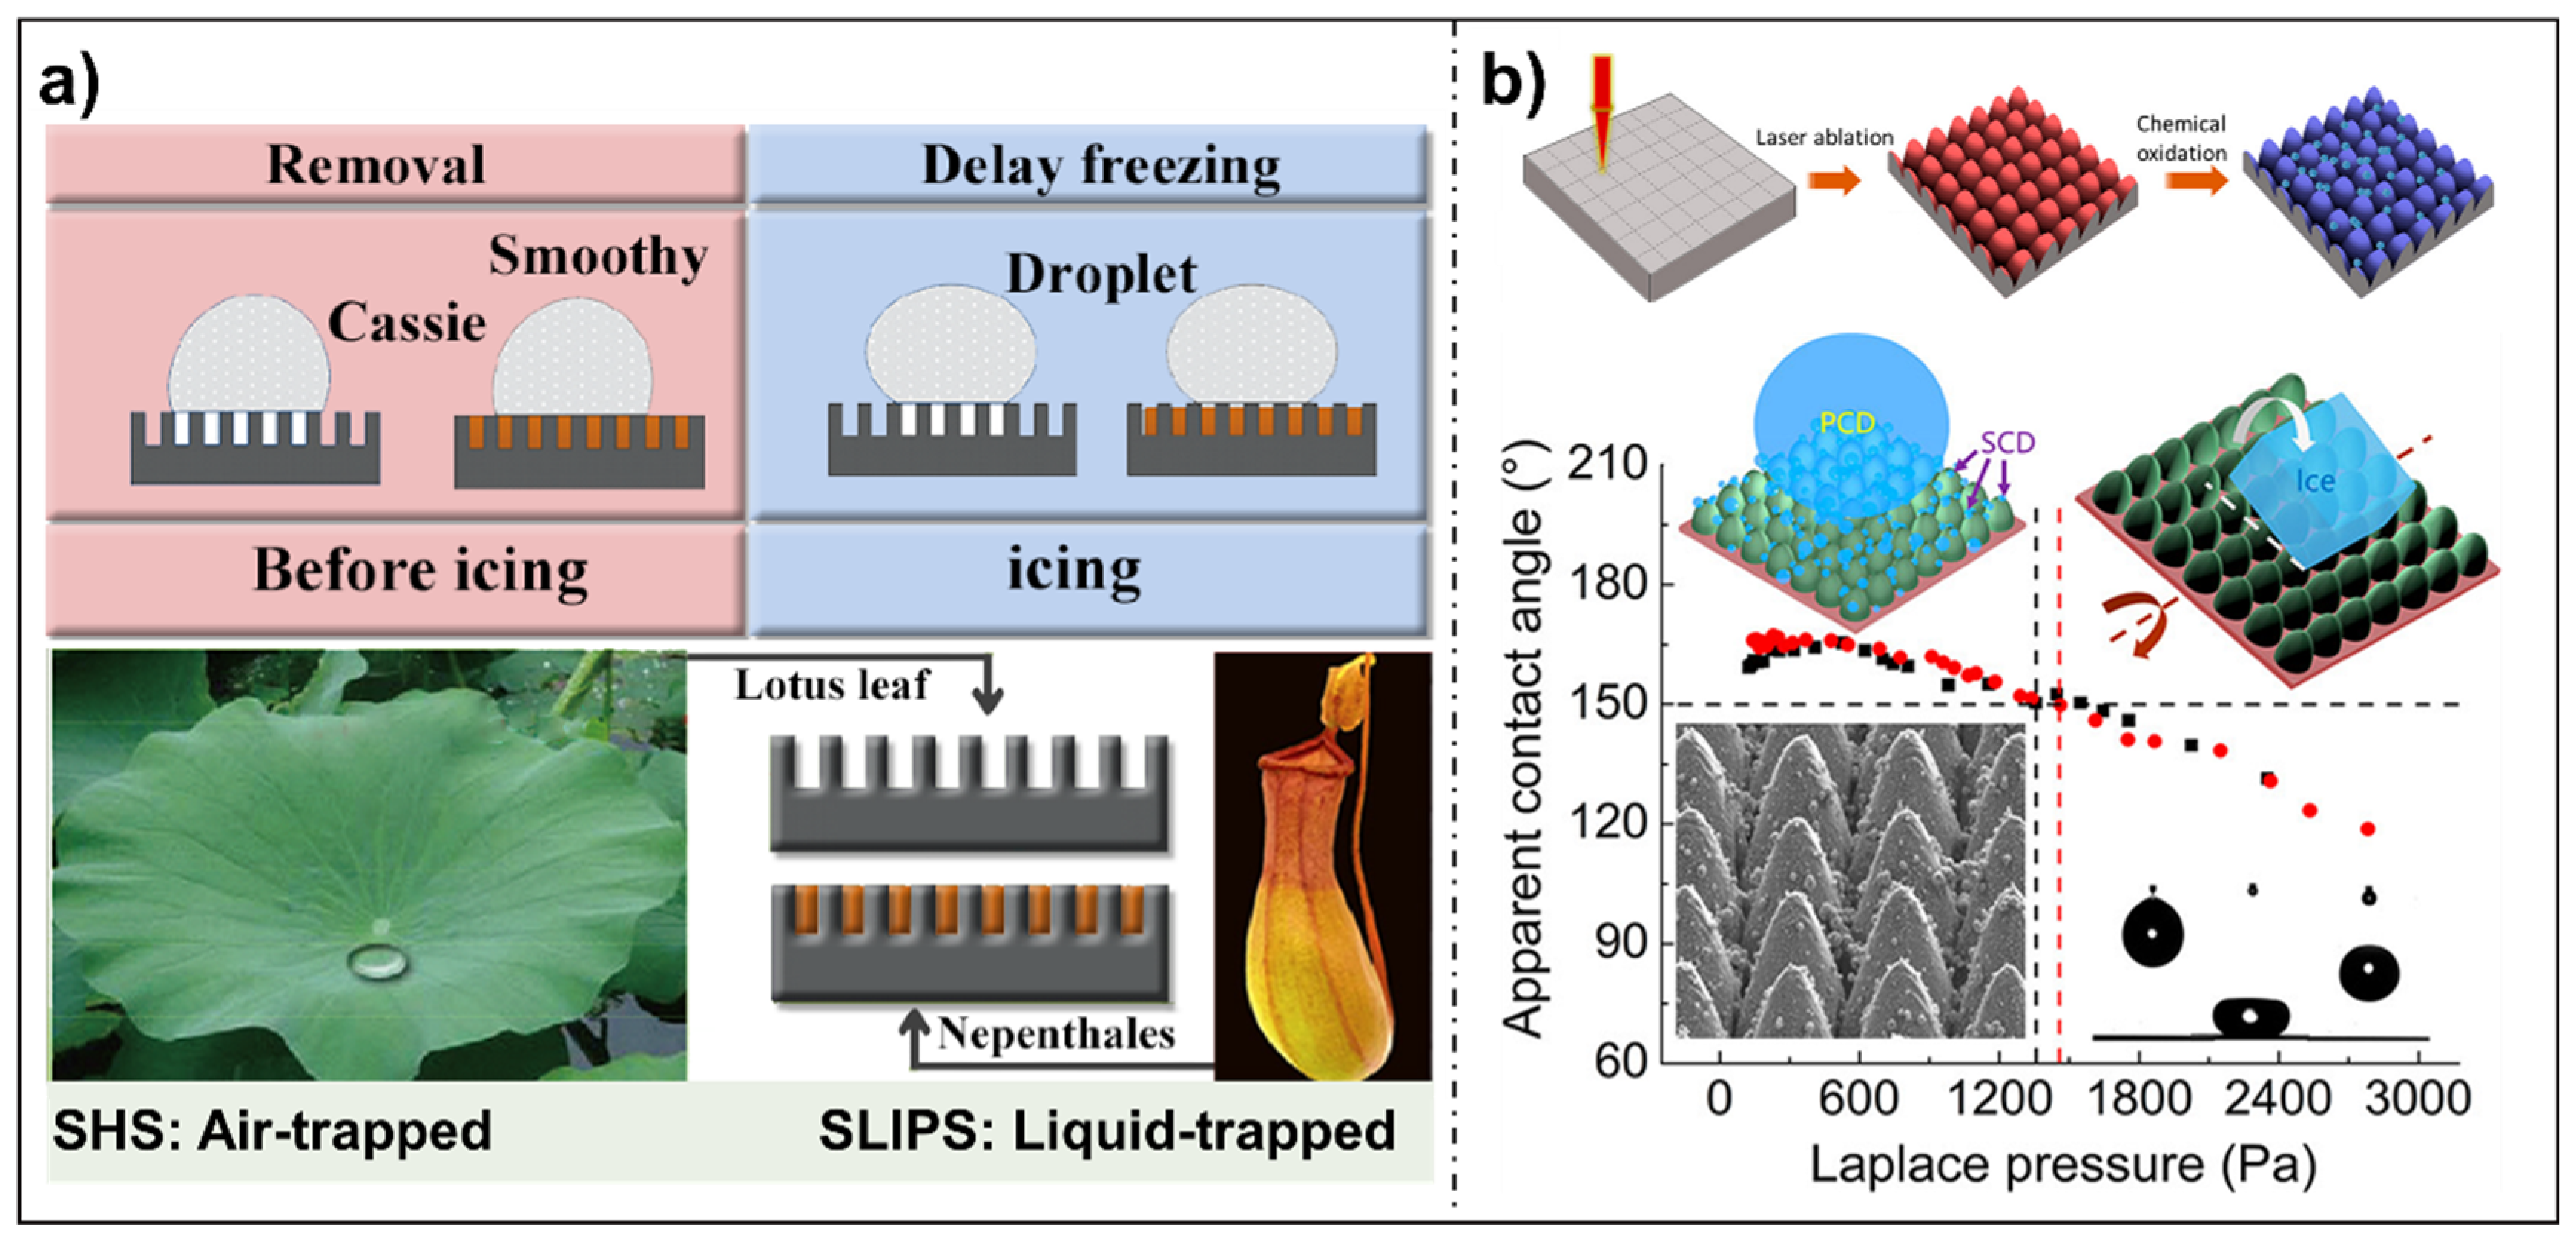 Water-repellent Hybrid Nanowire and Micro-scale Denticle Structures on  Flexible Substrates of Effective Air Retention